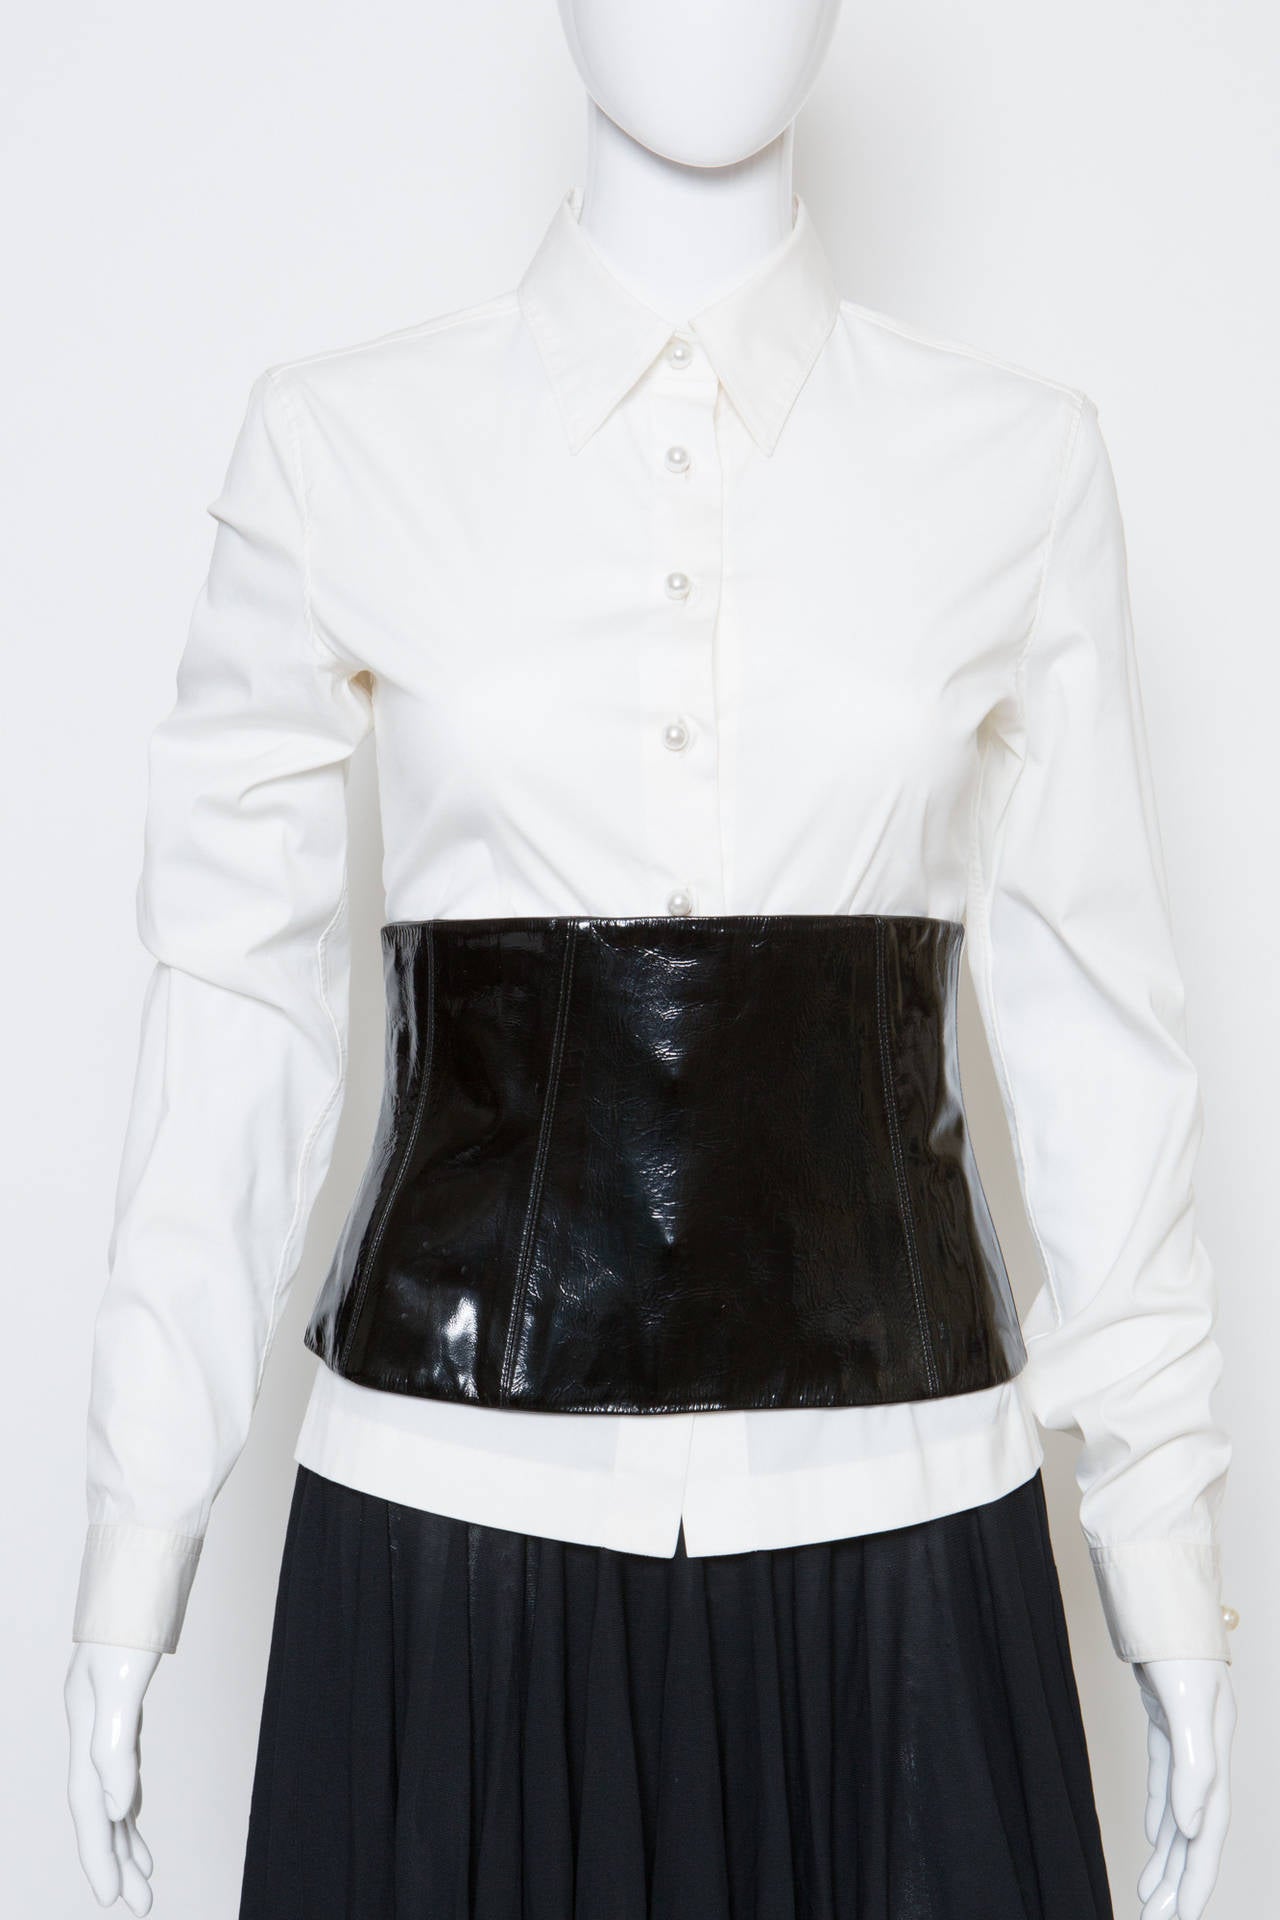 White cotton shirt from Chanel with pearl-tone buttons at front opening and cuff links with silver-tone and pearl-tone beads. This very chic shirt comes with a black vinyl leather corset belt (21cm width) with a silk lining and a center back zip